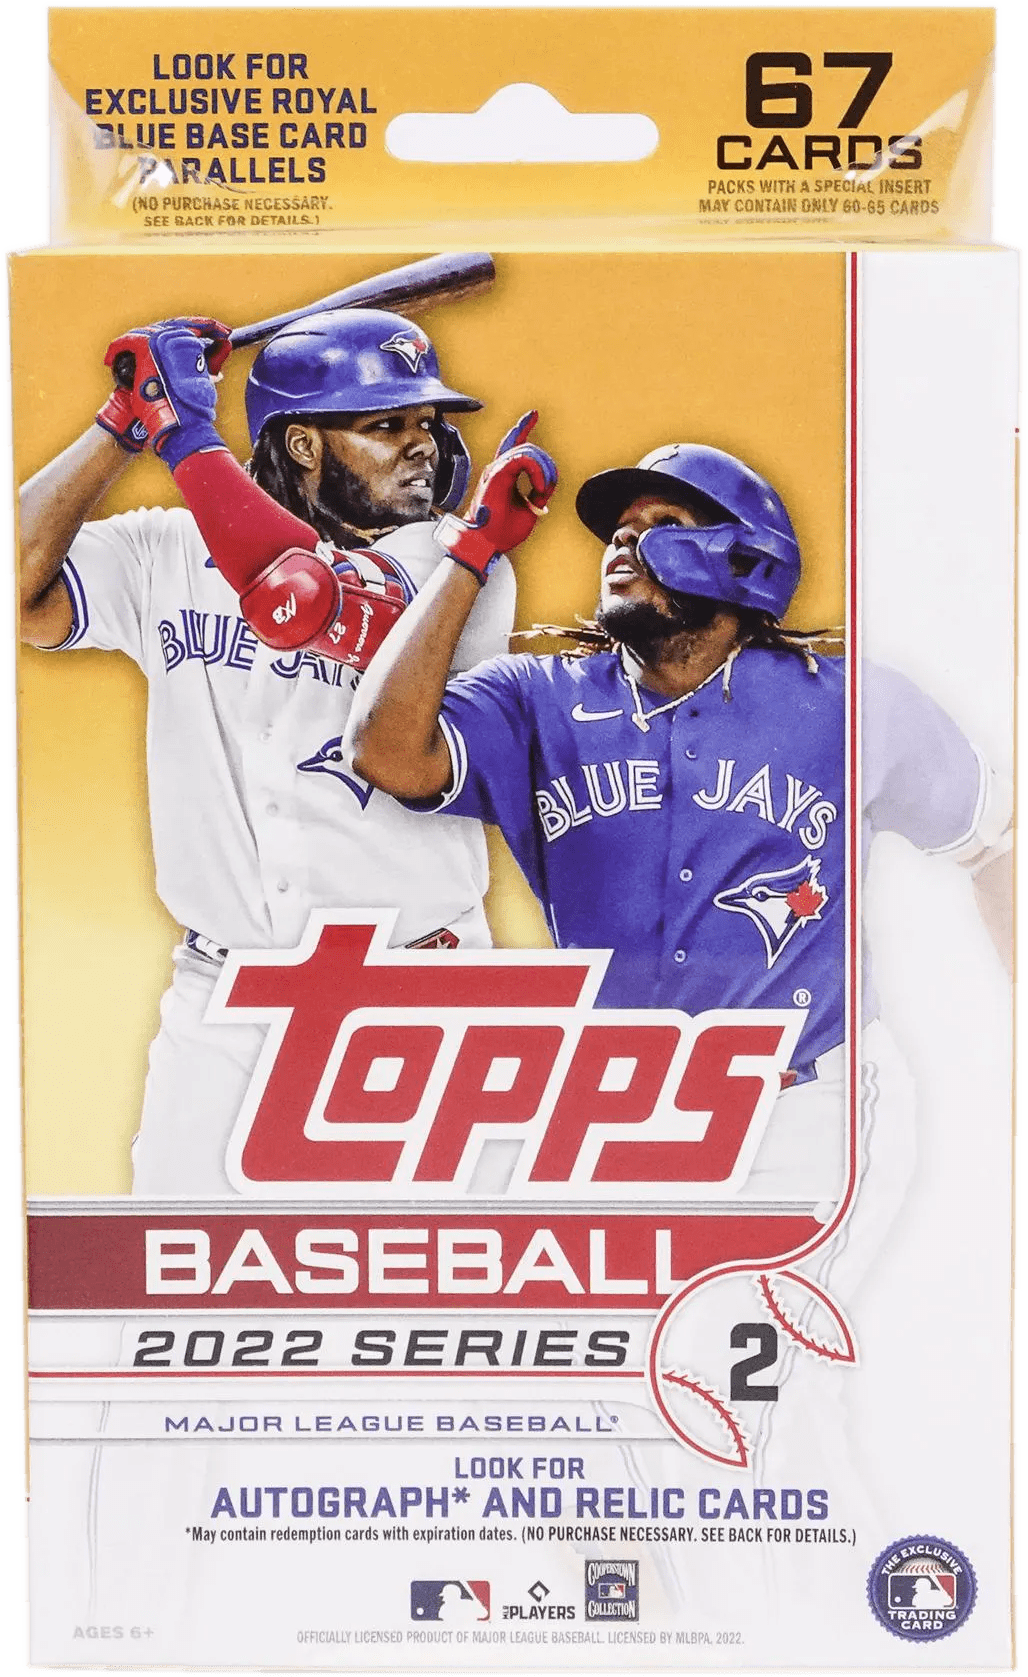 Baseball cards: A review of Dodgers cards in 2022 Topps Series 1